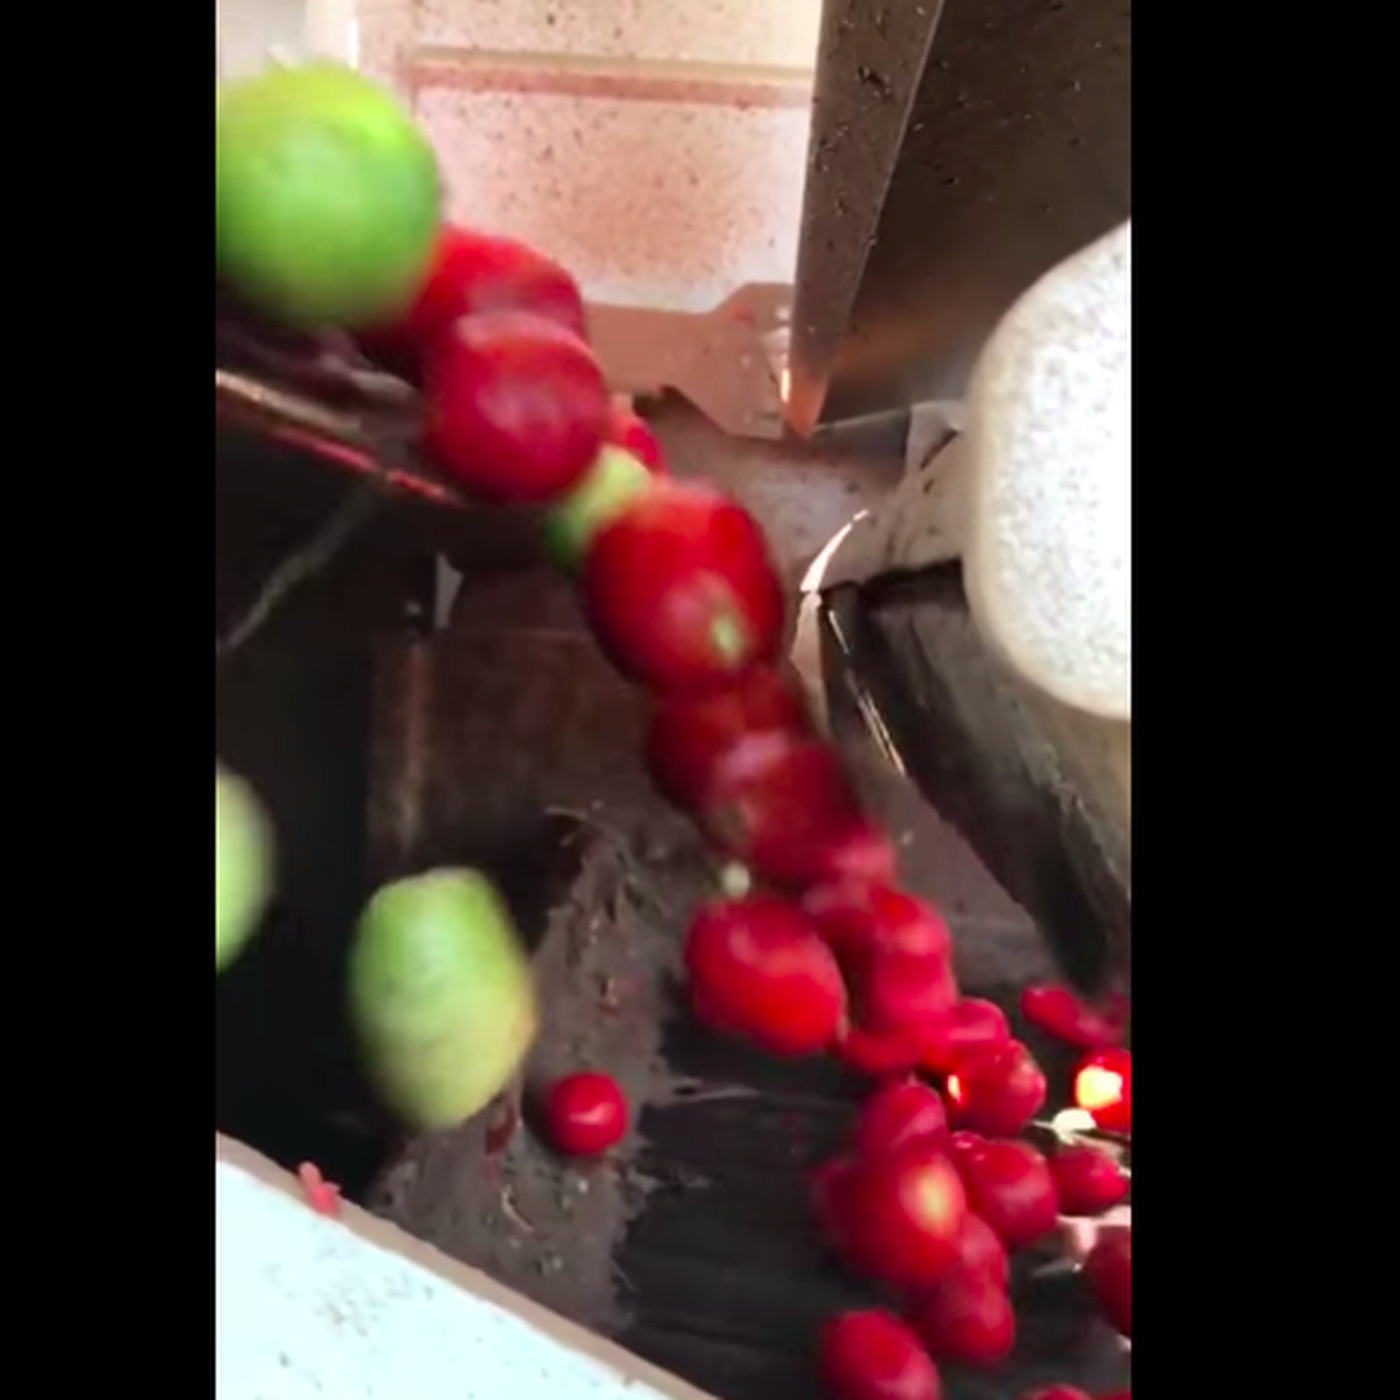 A tomato sorter sorting green tomatoes from red tomatoes.